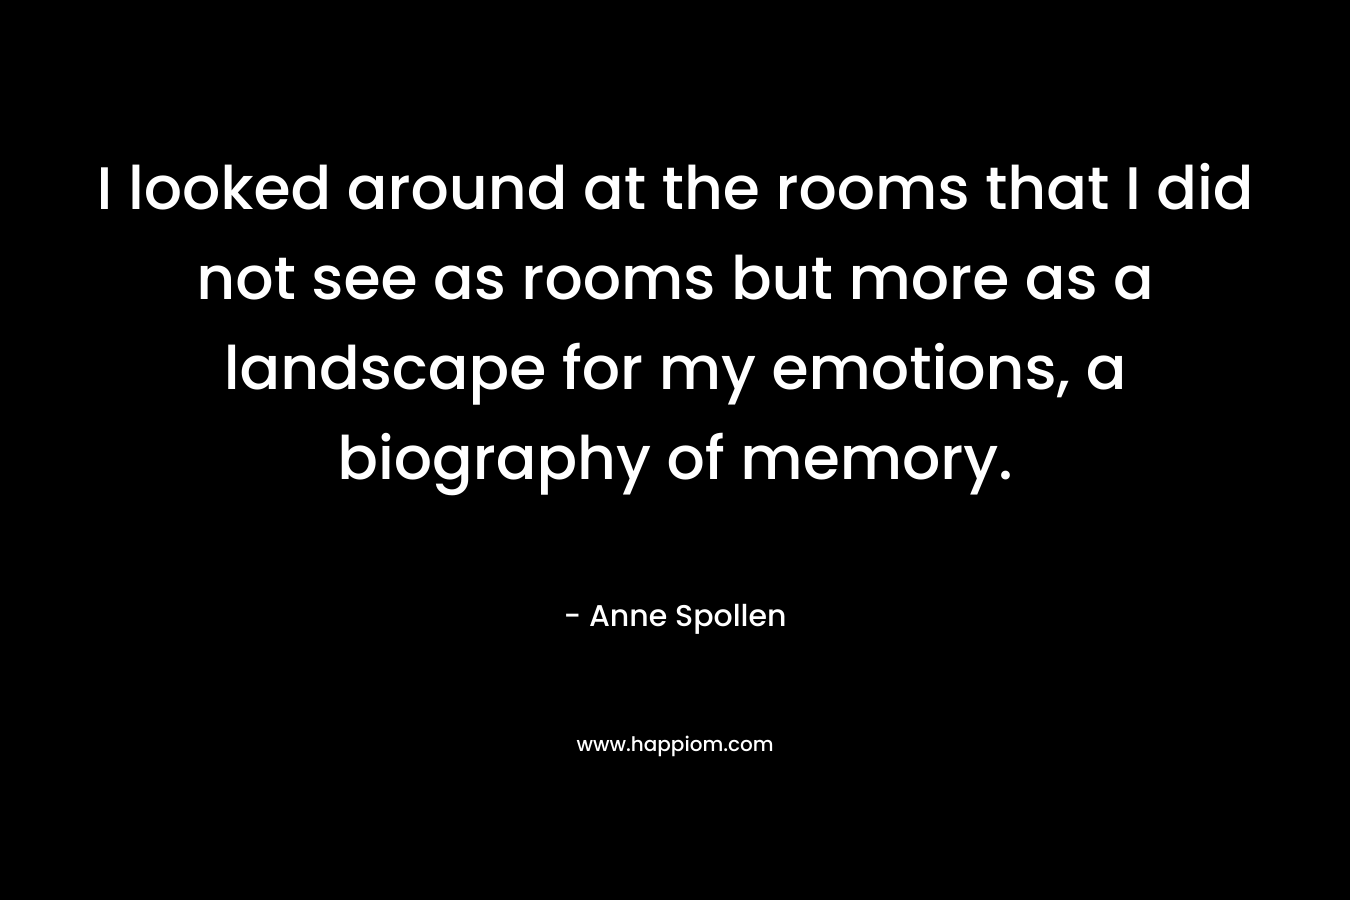 I looked around at the rooms that I did not see as rooms but more as a landscape for my emotions, a biography of memory. – Anne Spollen